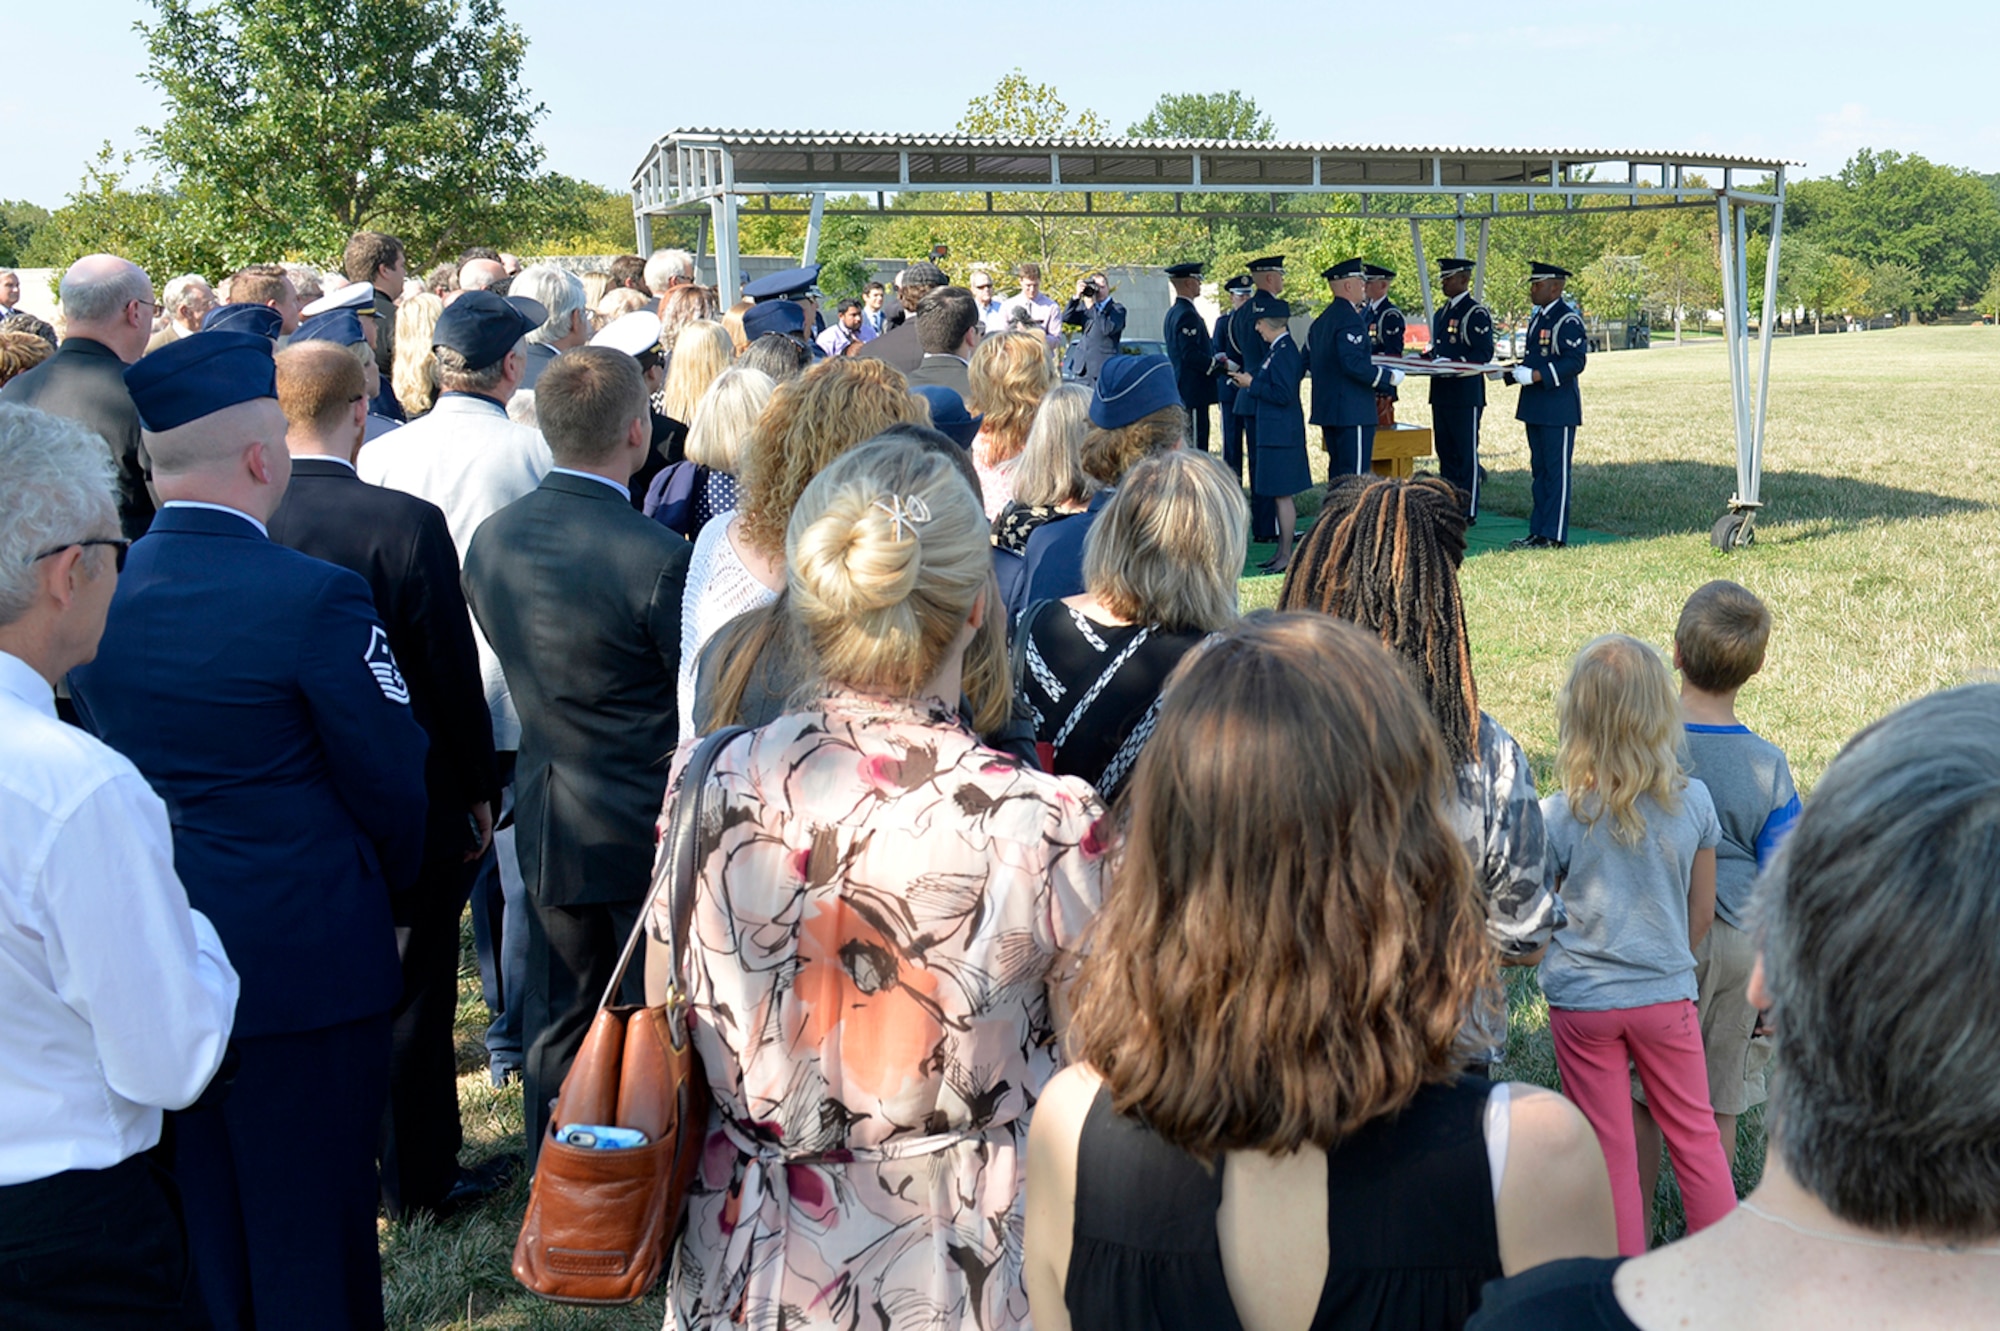 Family and friends pay their respects as 2nd Lt. Elaine Harmon, one of the original Women Airforce Service Pilots, is laid to rest at Arlington National Cemetery, Va., Sept. 7, 2016. Harmon died April 21, 2015, at the age of 95. (U.S. Air Force photo/Staff Sgt. Whitney Stanfield) 